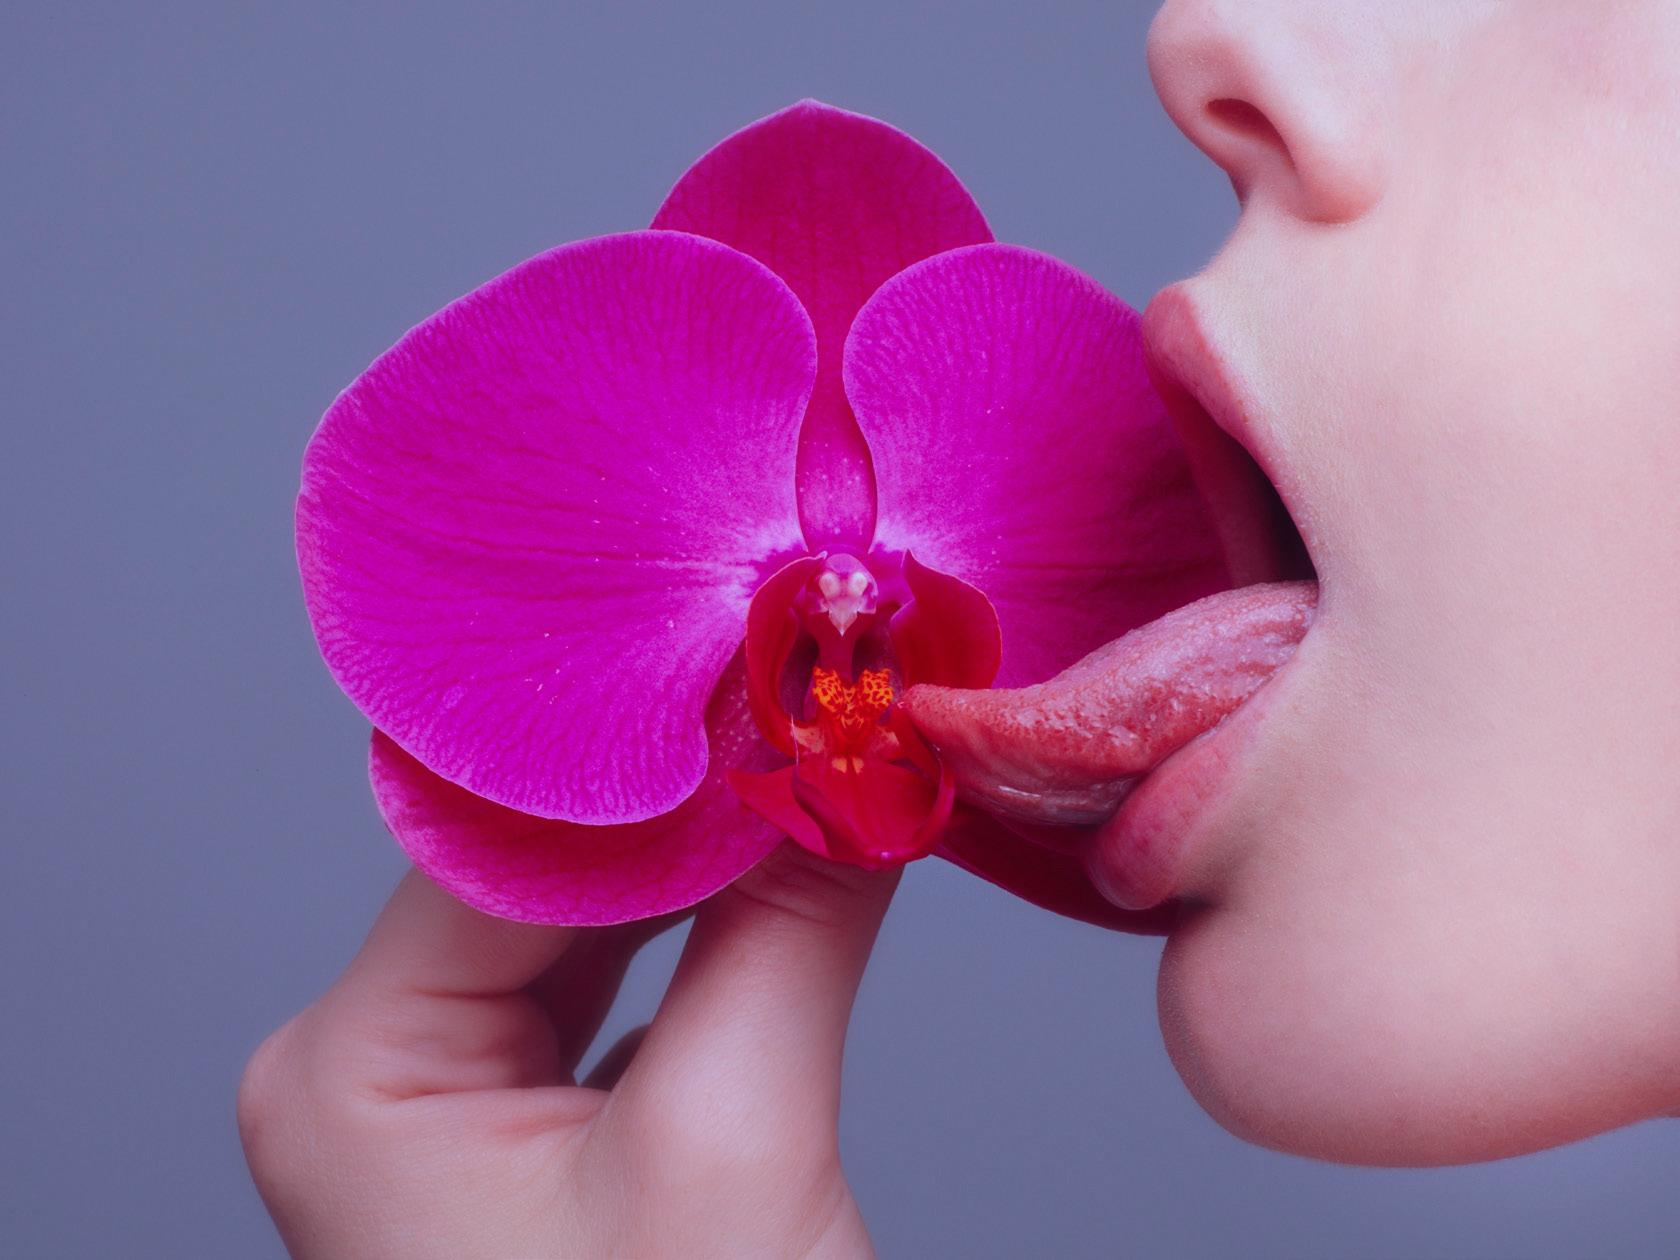 Tyler Shields - Orchid, Photography 2019